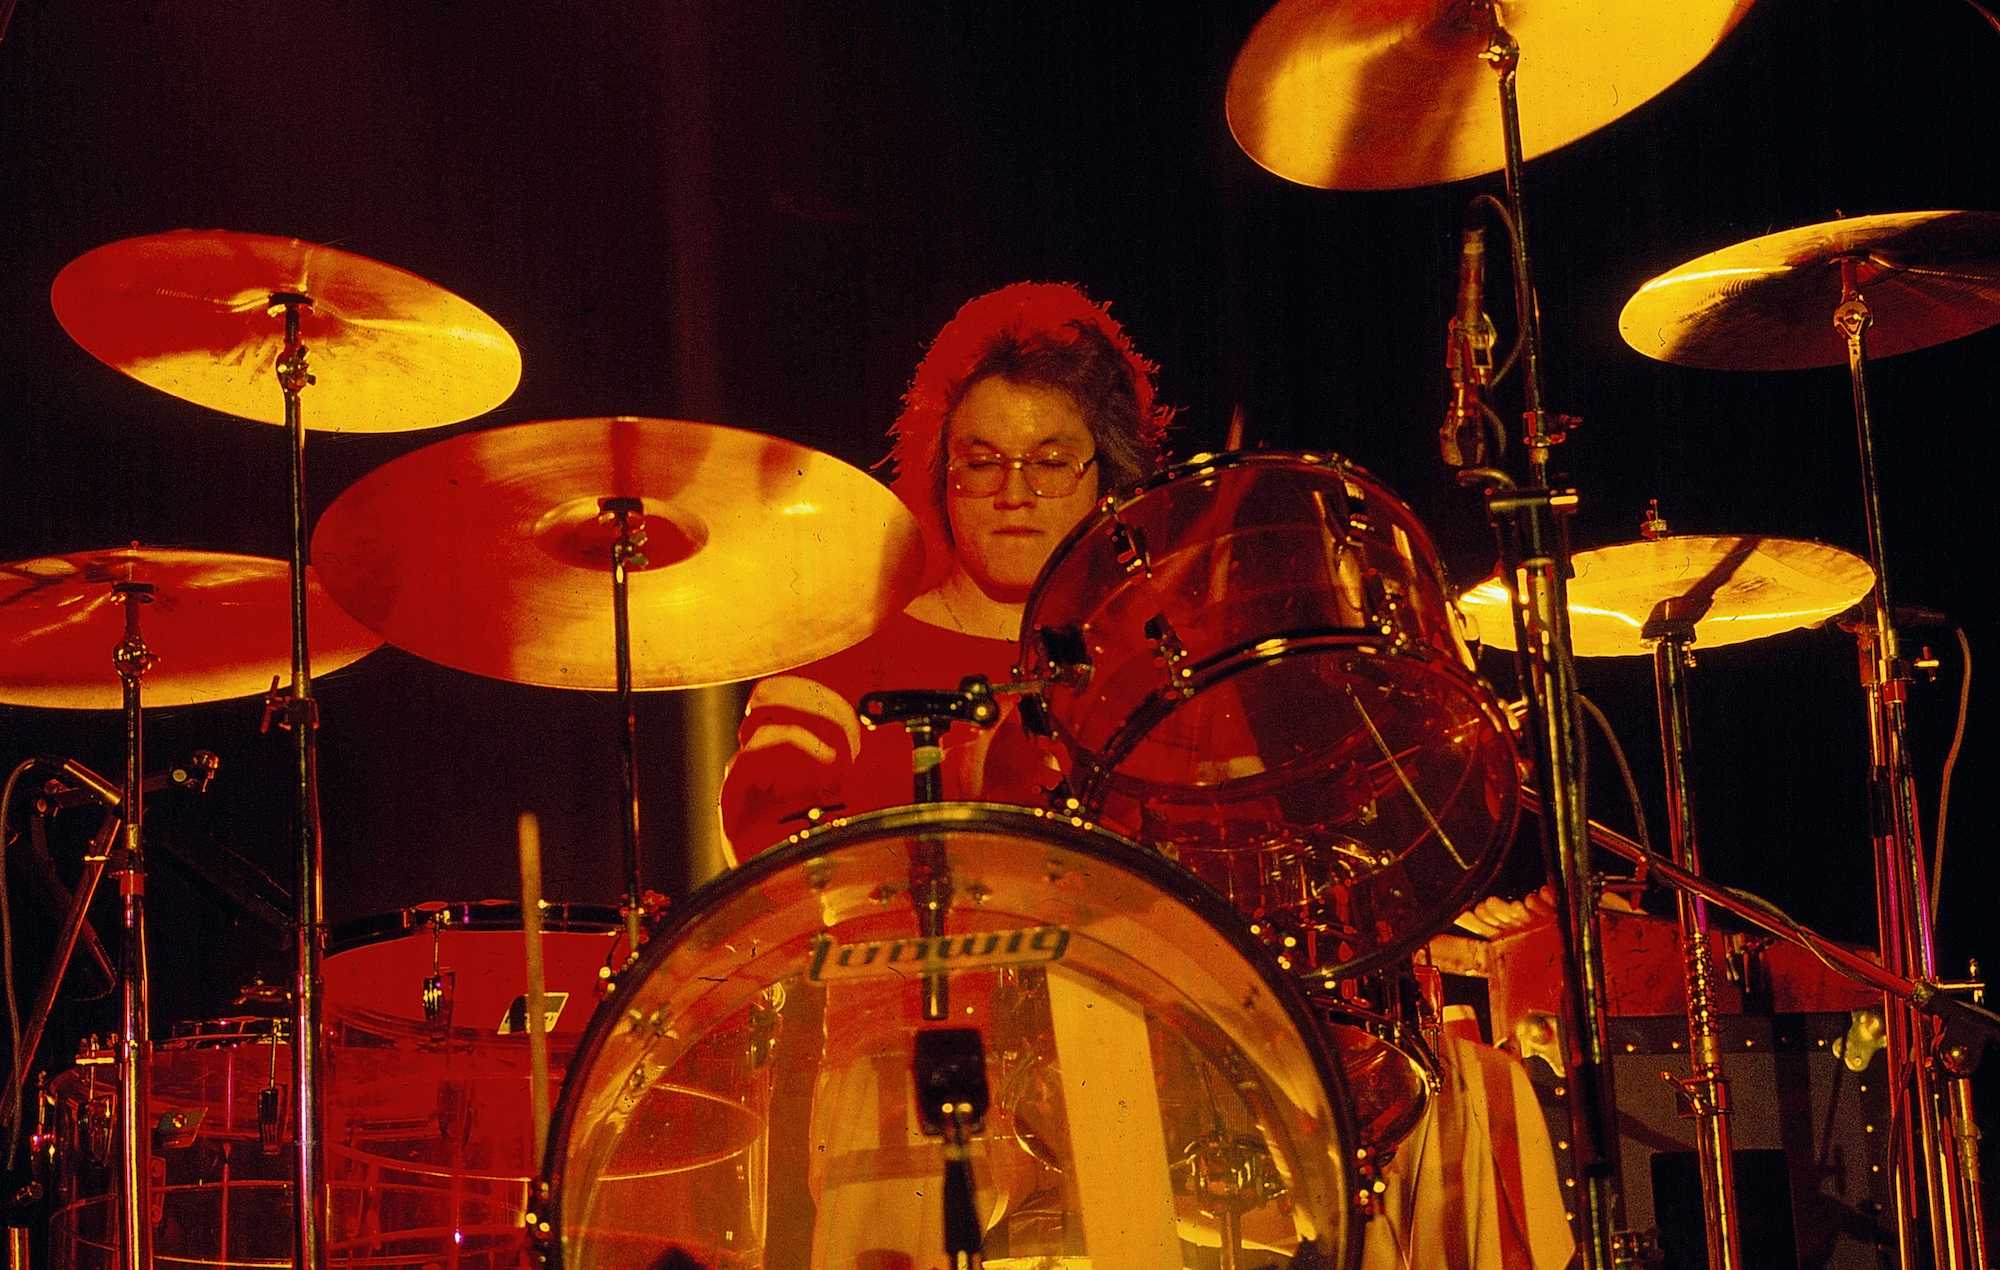 Robbie Bachman Drummer for Rock Band BTO, Dead at Age 69